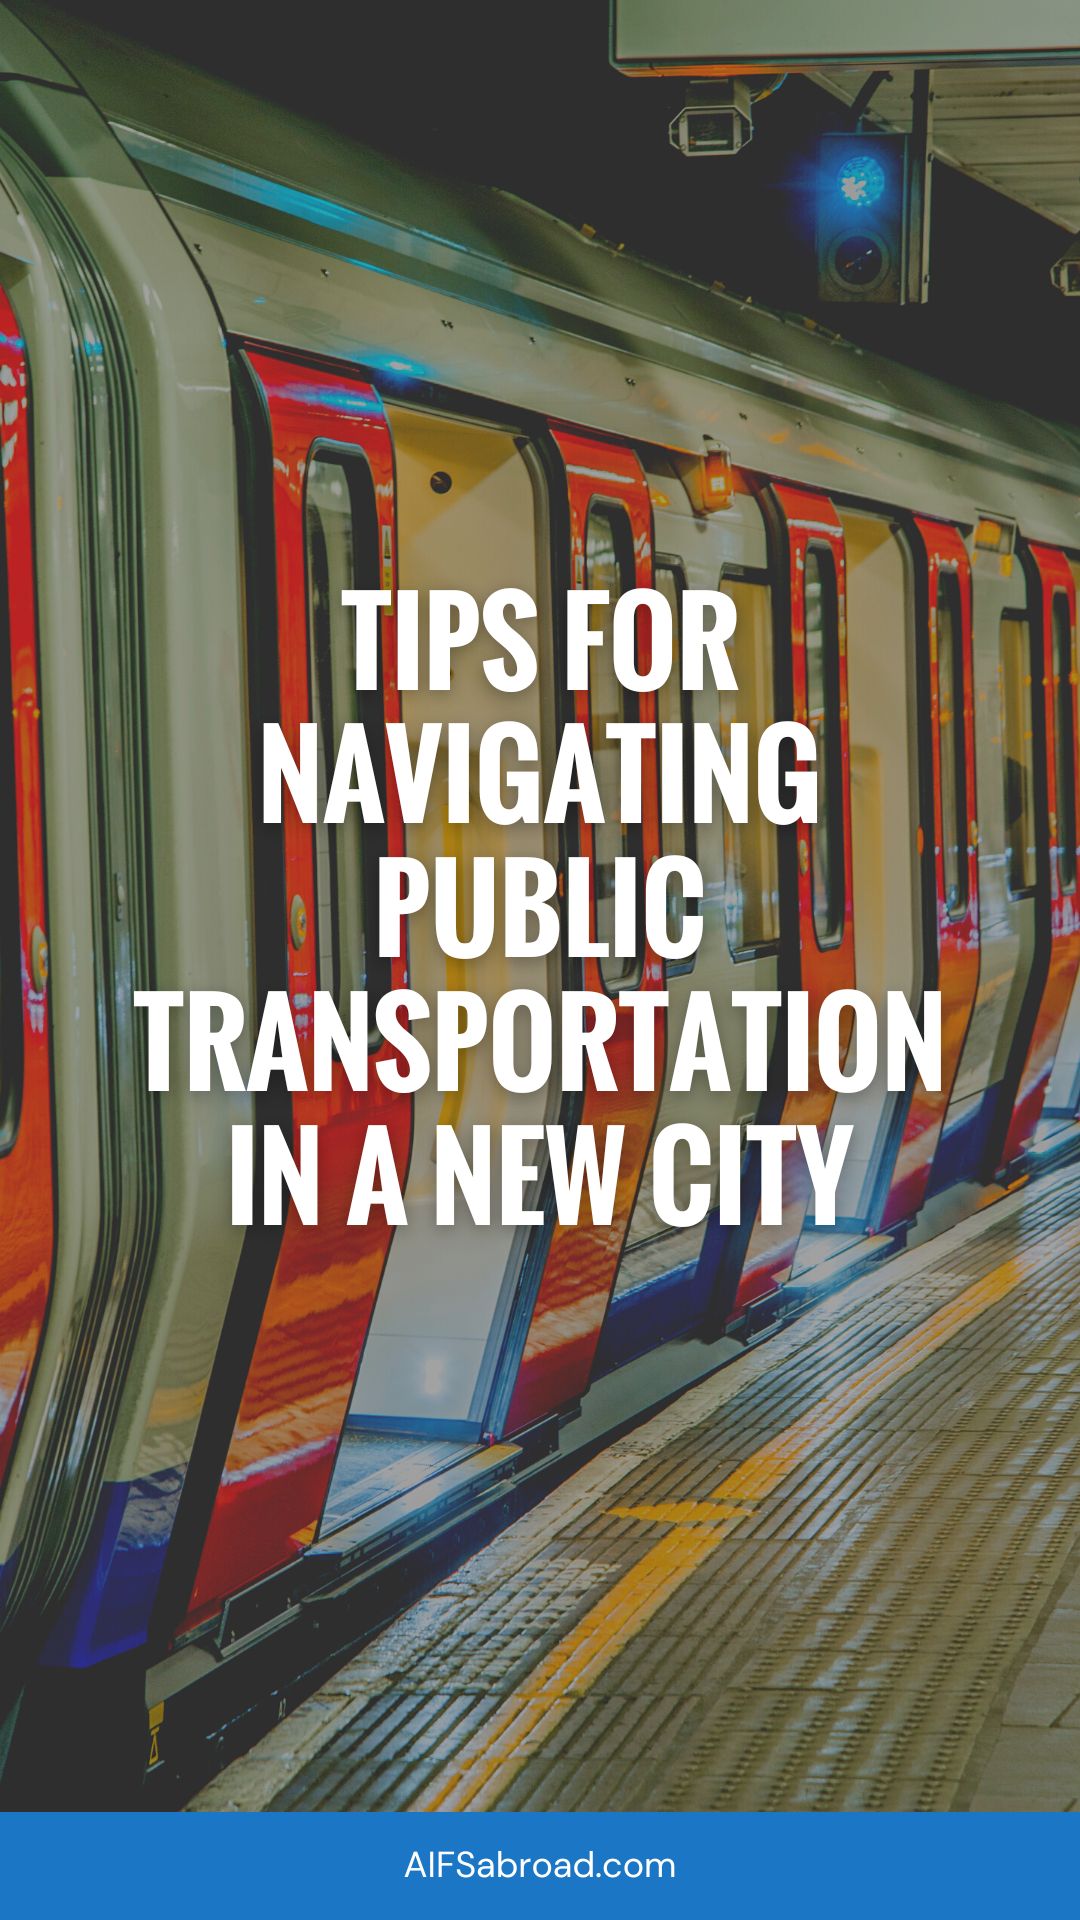 Pin image: London underground with text overlay saying "Tips for Navigating Public Transportation in a New City"